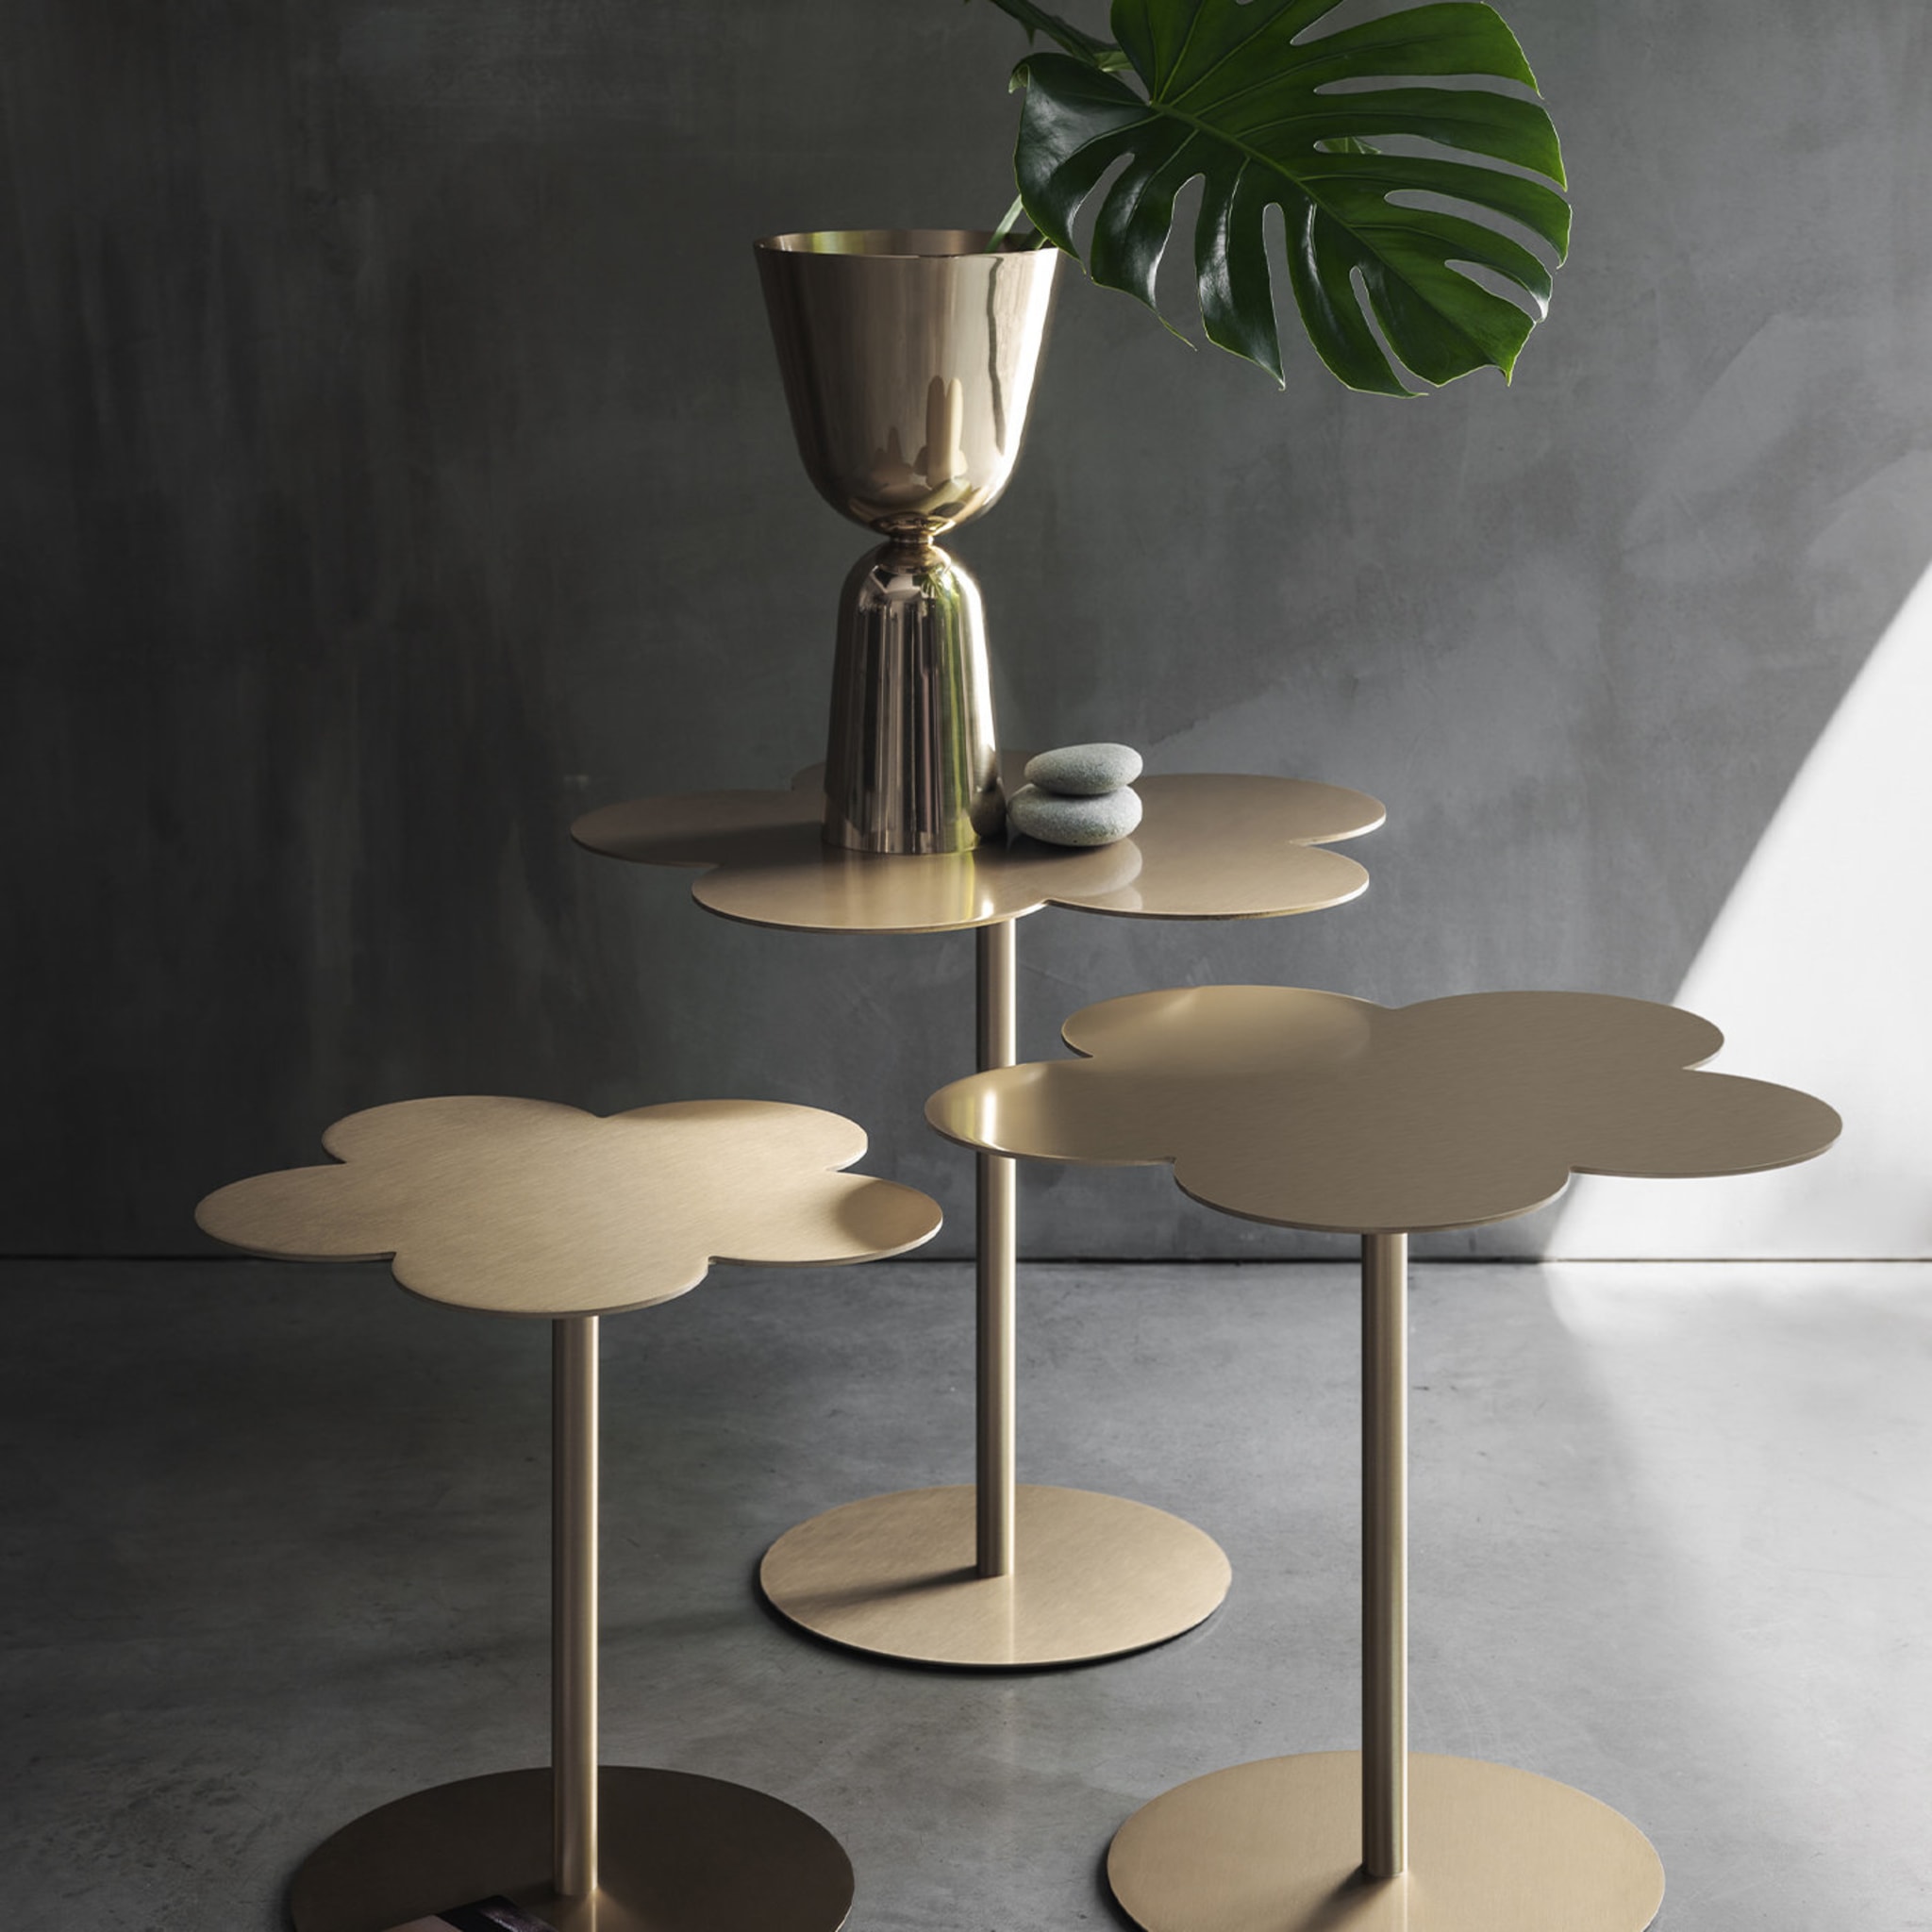 Flowers Small Brass Side Table by Stefano Giovannoni - Alternative view 1